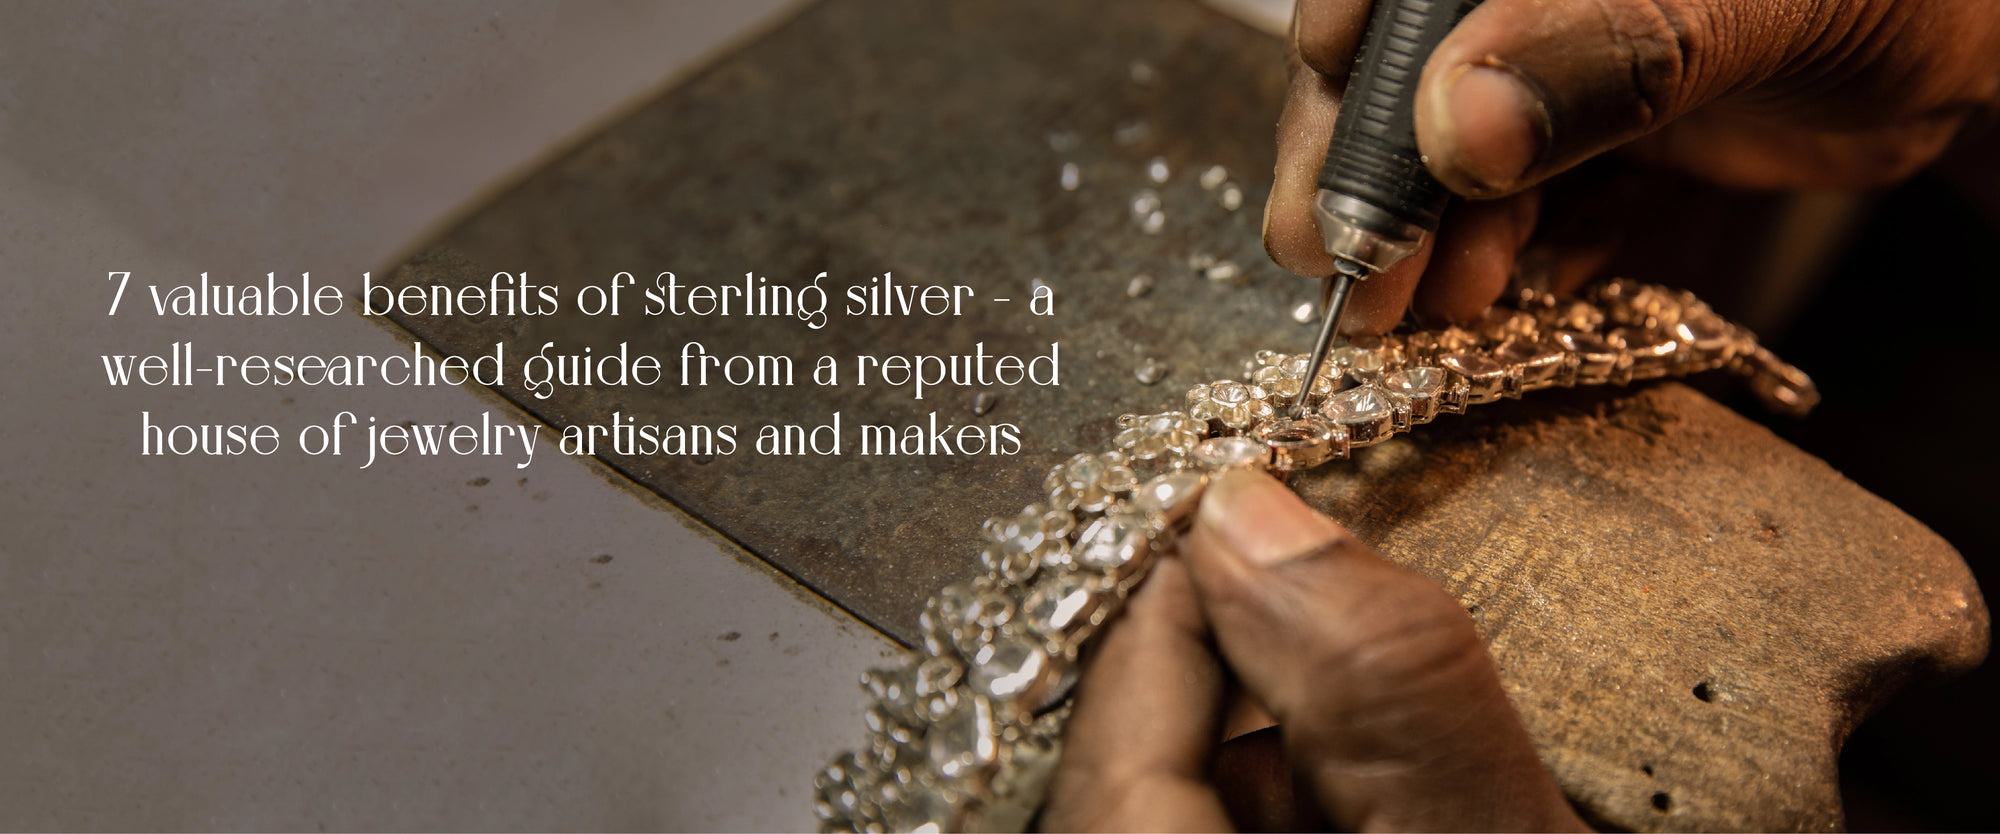 7 valuable benefits of sterling silver - a well-researched guide from a reputed house of jewelry artisans and makers